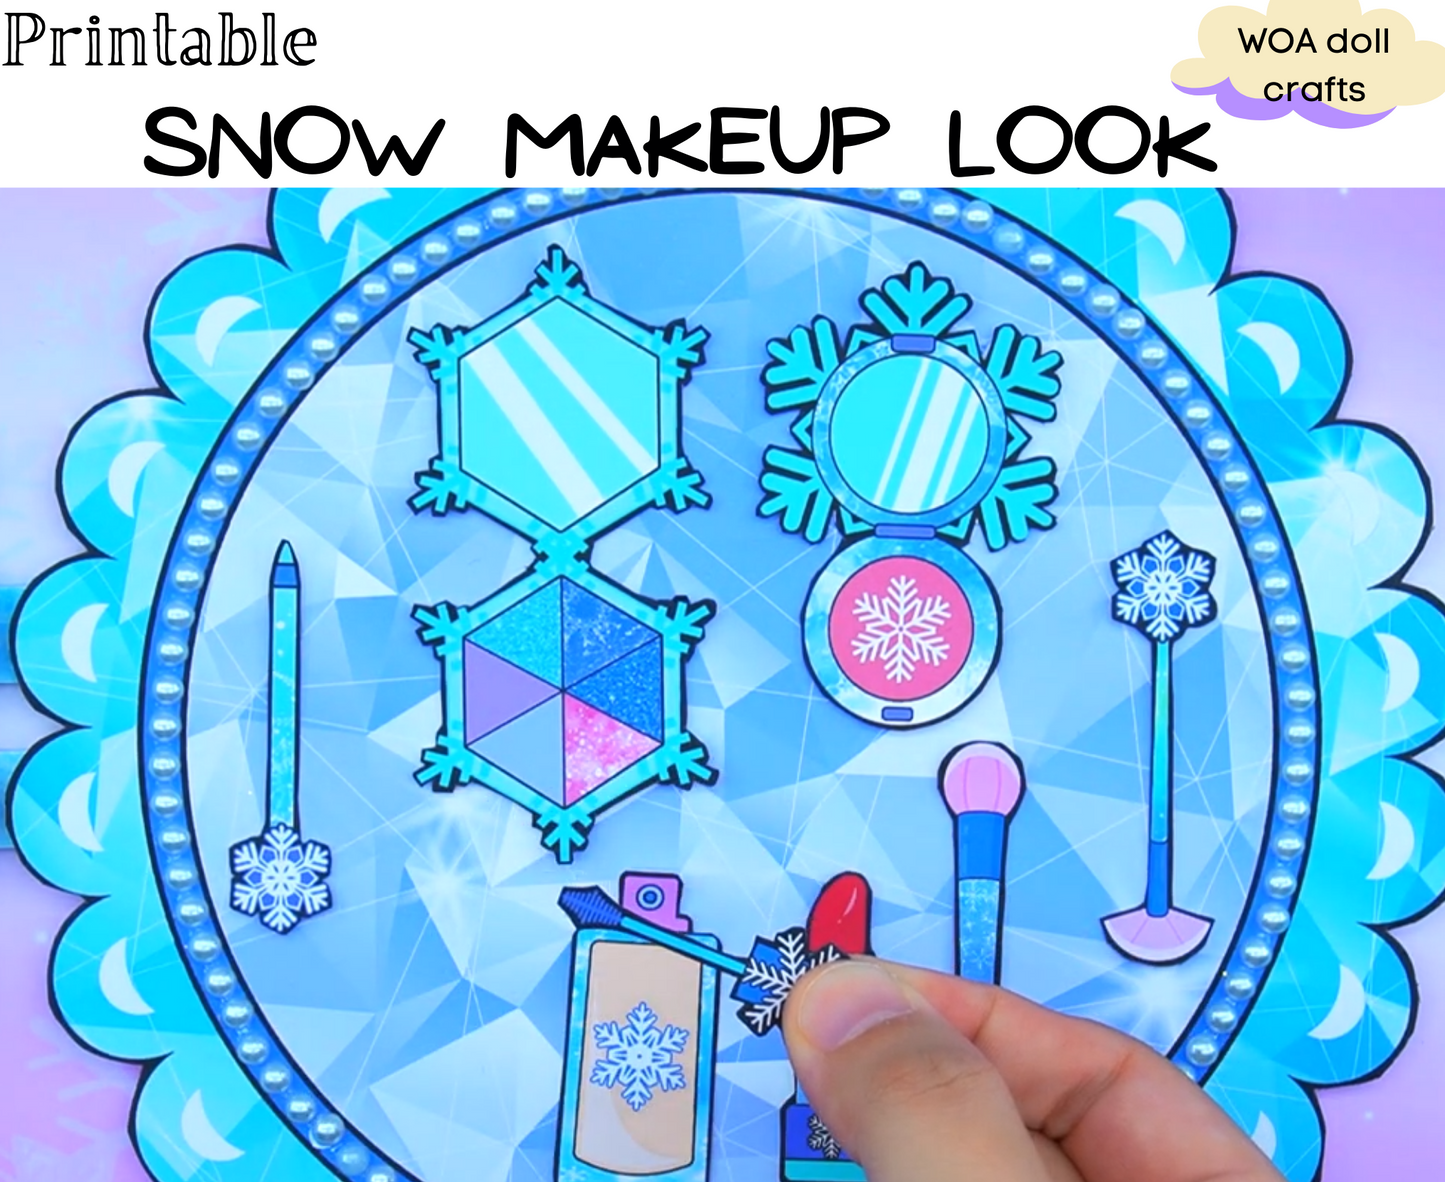 Snow makeup look printable ❄️ DIY kit for your little one - Paper doll house - Activity book for kids ❄️ Woa Doll Crafts